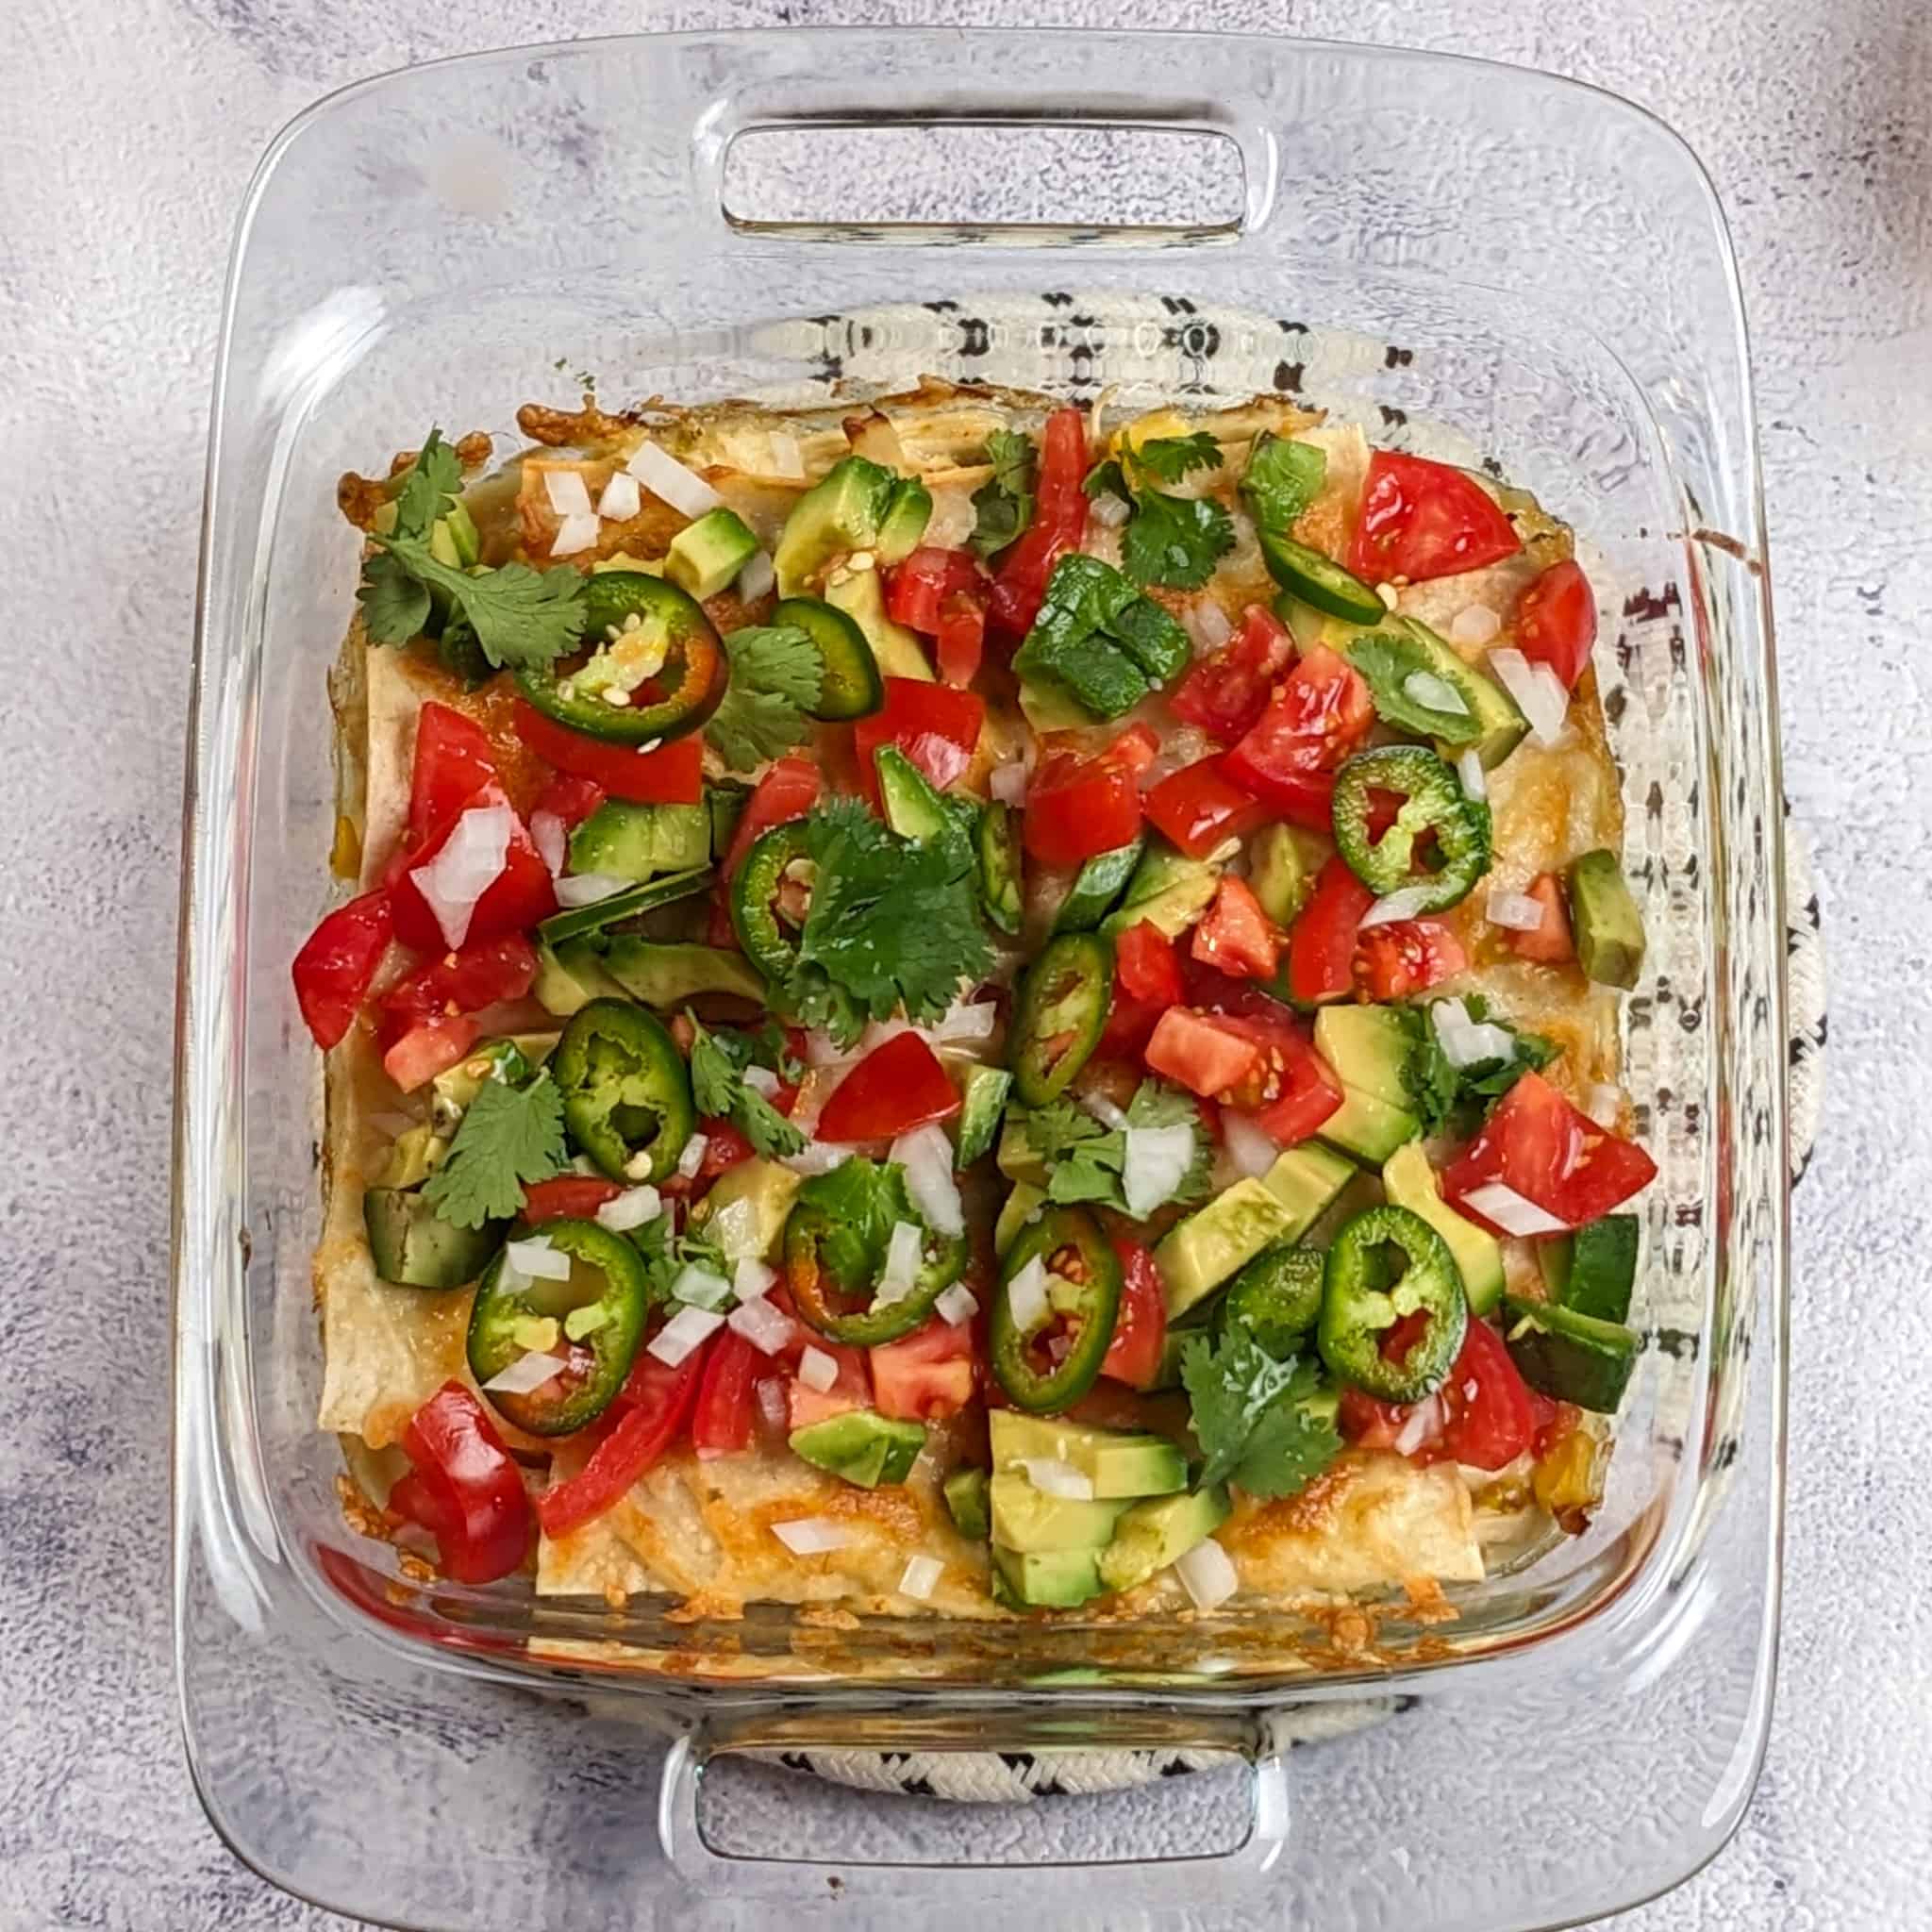 diced white onion, cilantro leaves, sliced jalapeno rings, diced tomatoes, and diced avocado pieces on top of the baked chicken tortilla casserole